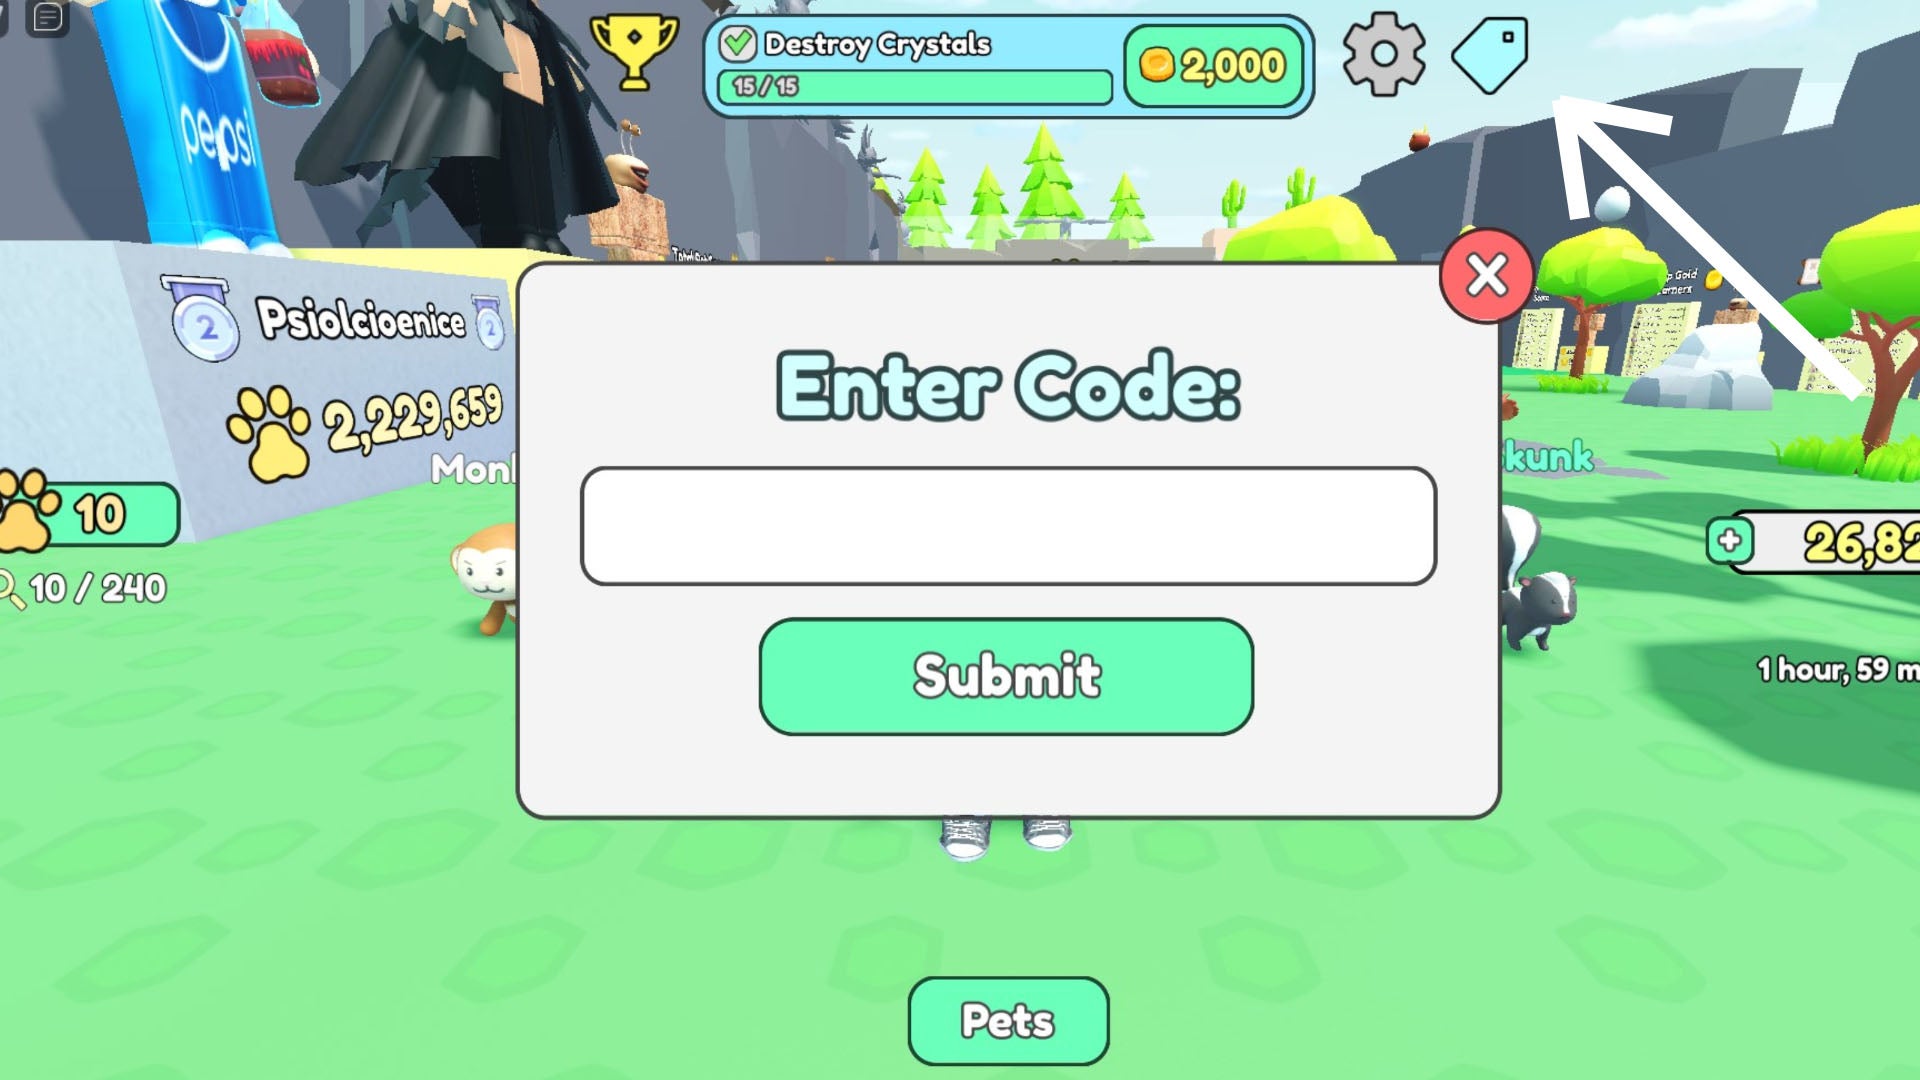 Roblox Collect All Pets code redemption menu, an arrow is pointing to the code redemption icon at the top of the screen.